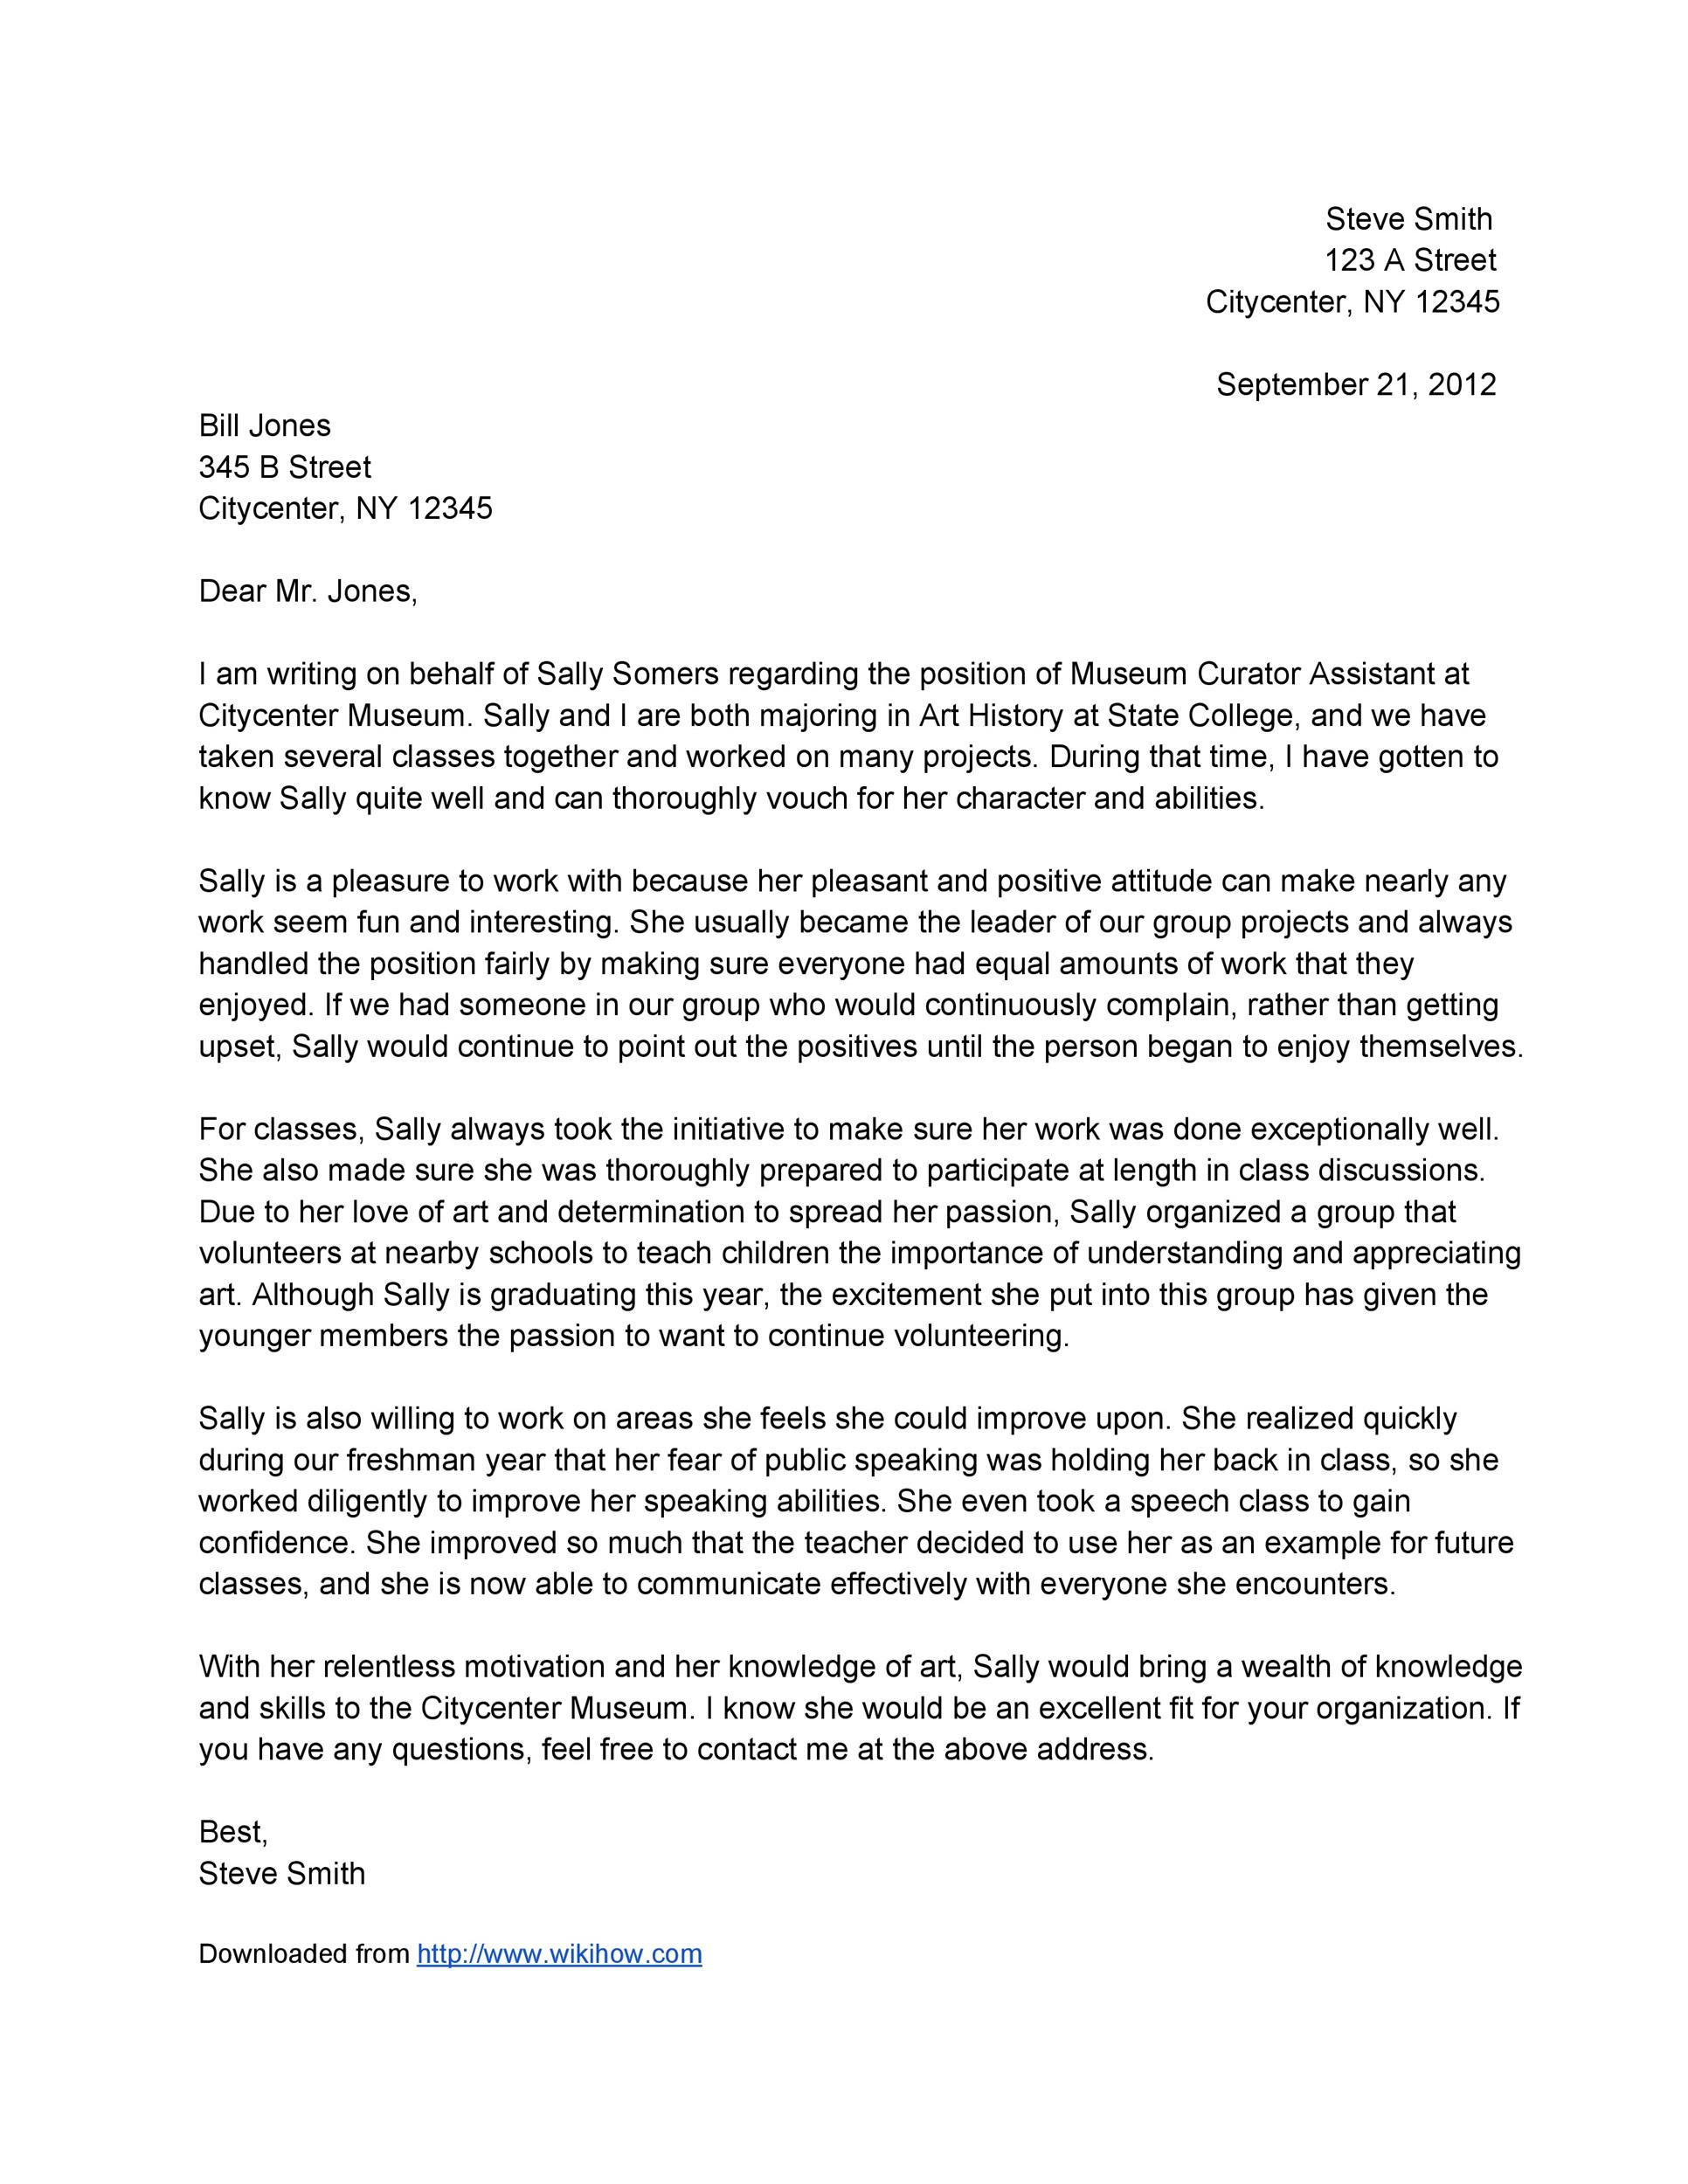 Letter Of Recommendation Template For College from templatelab.com